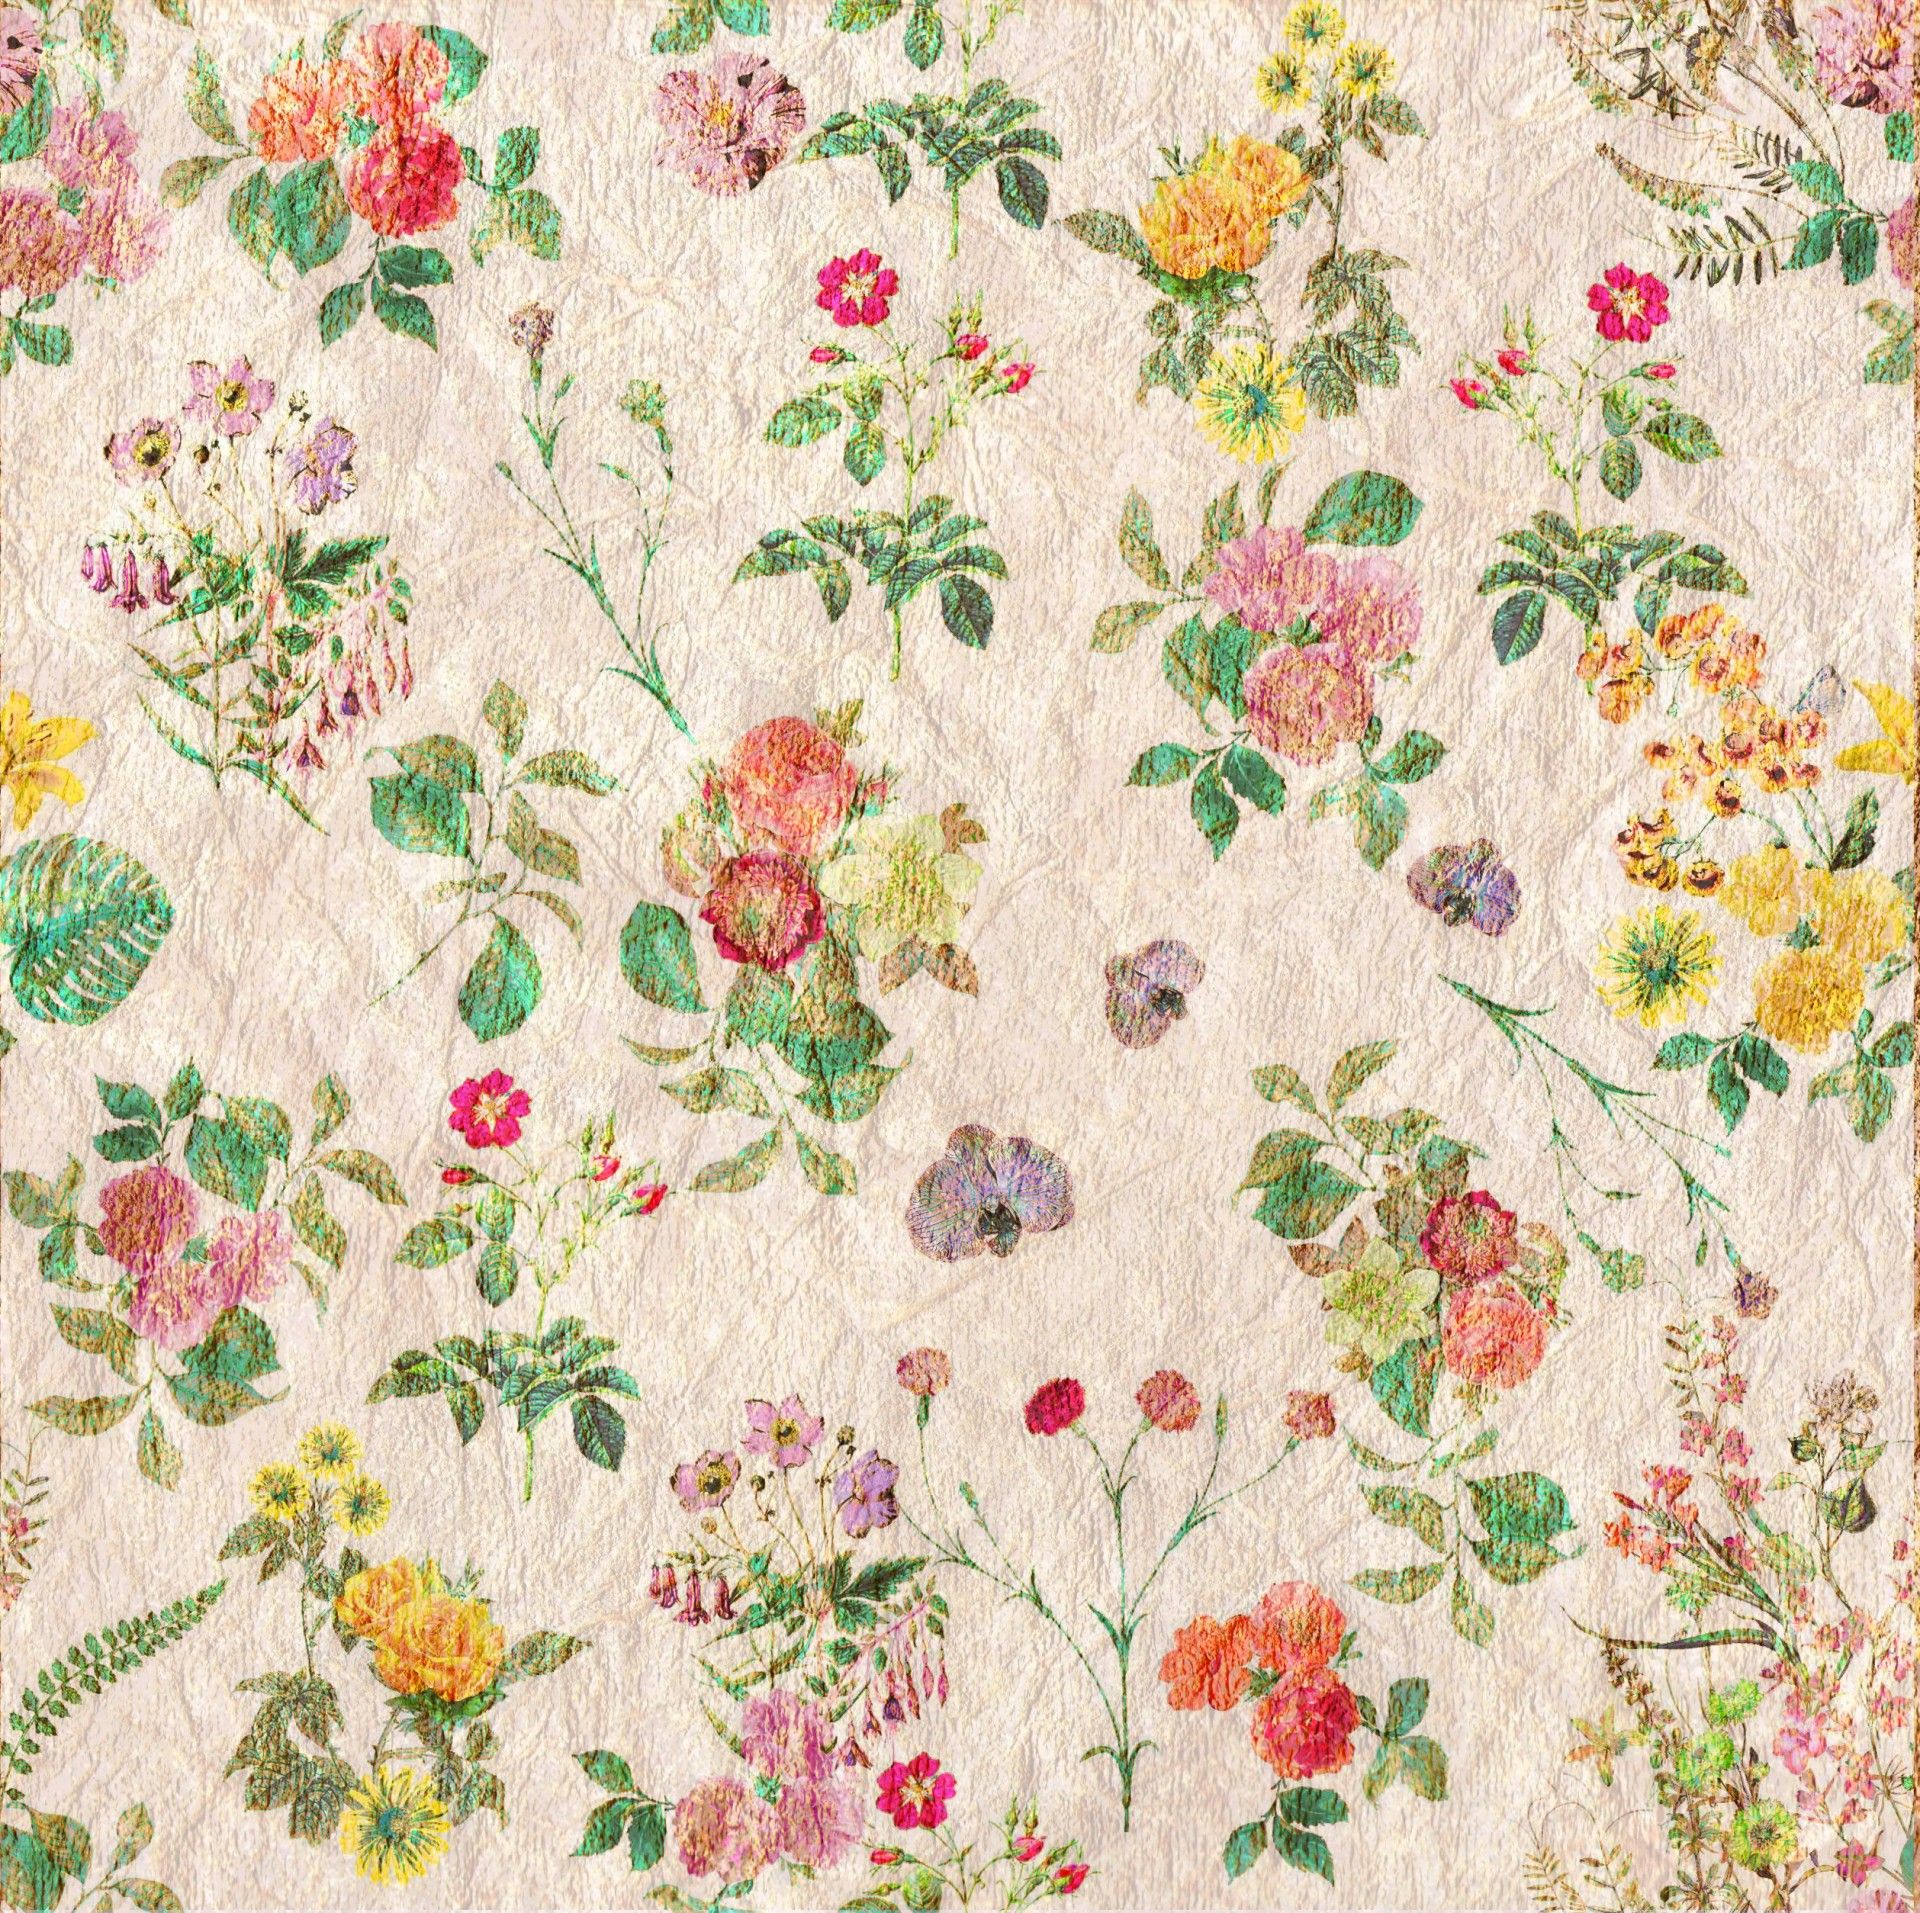 Vintage Flowers Wallpaper Pattern Free Domain Picture